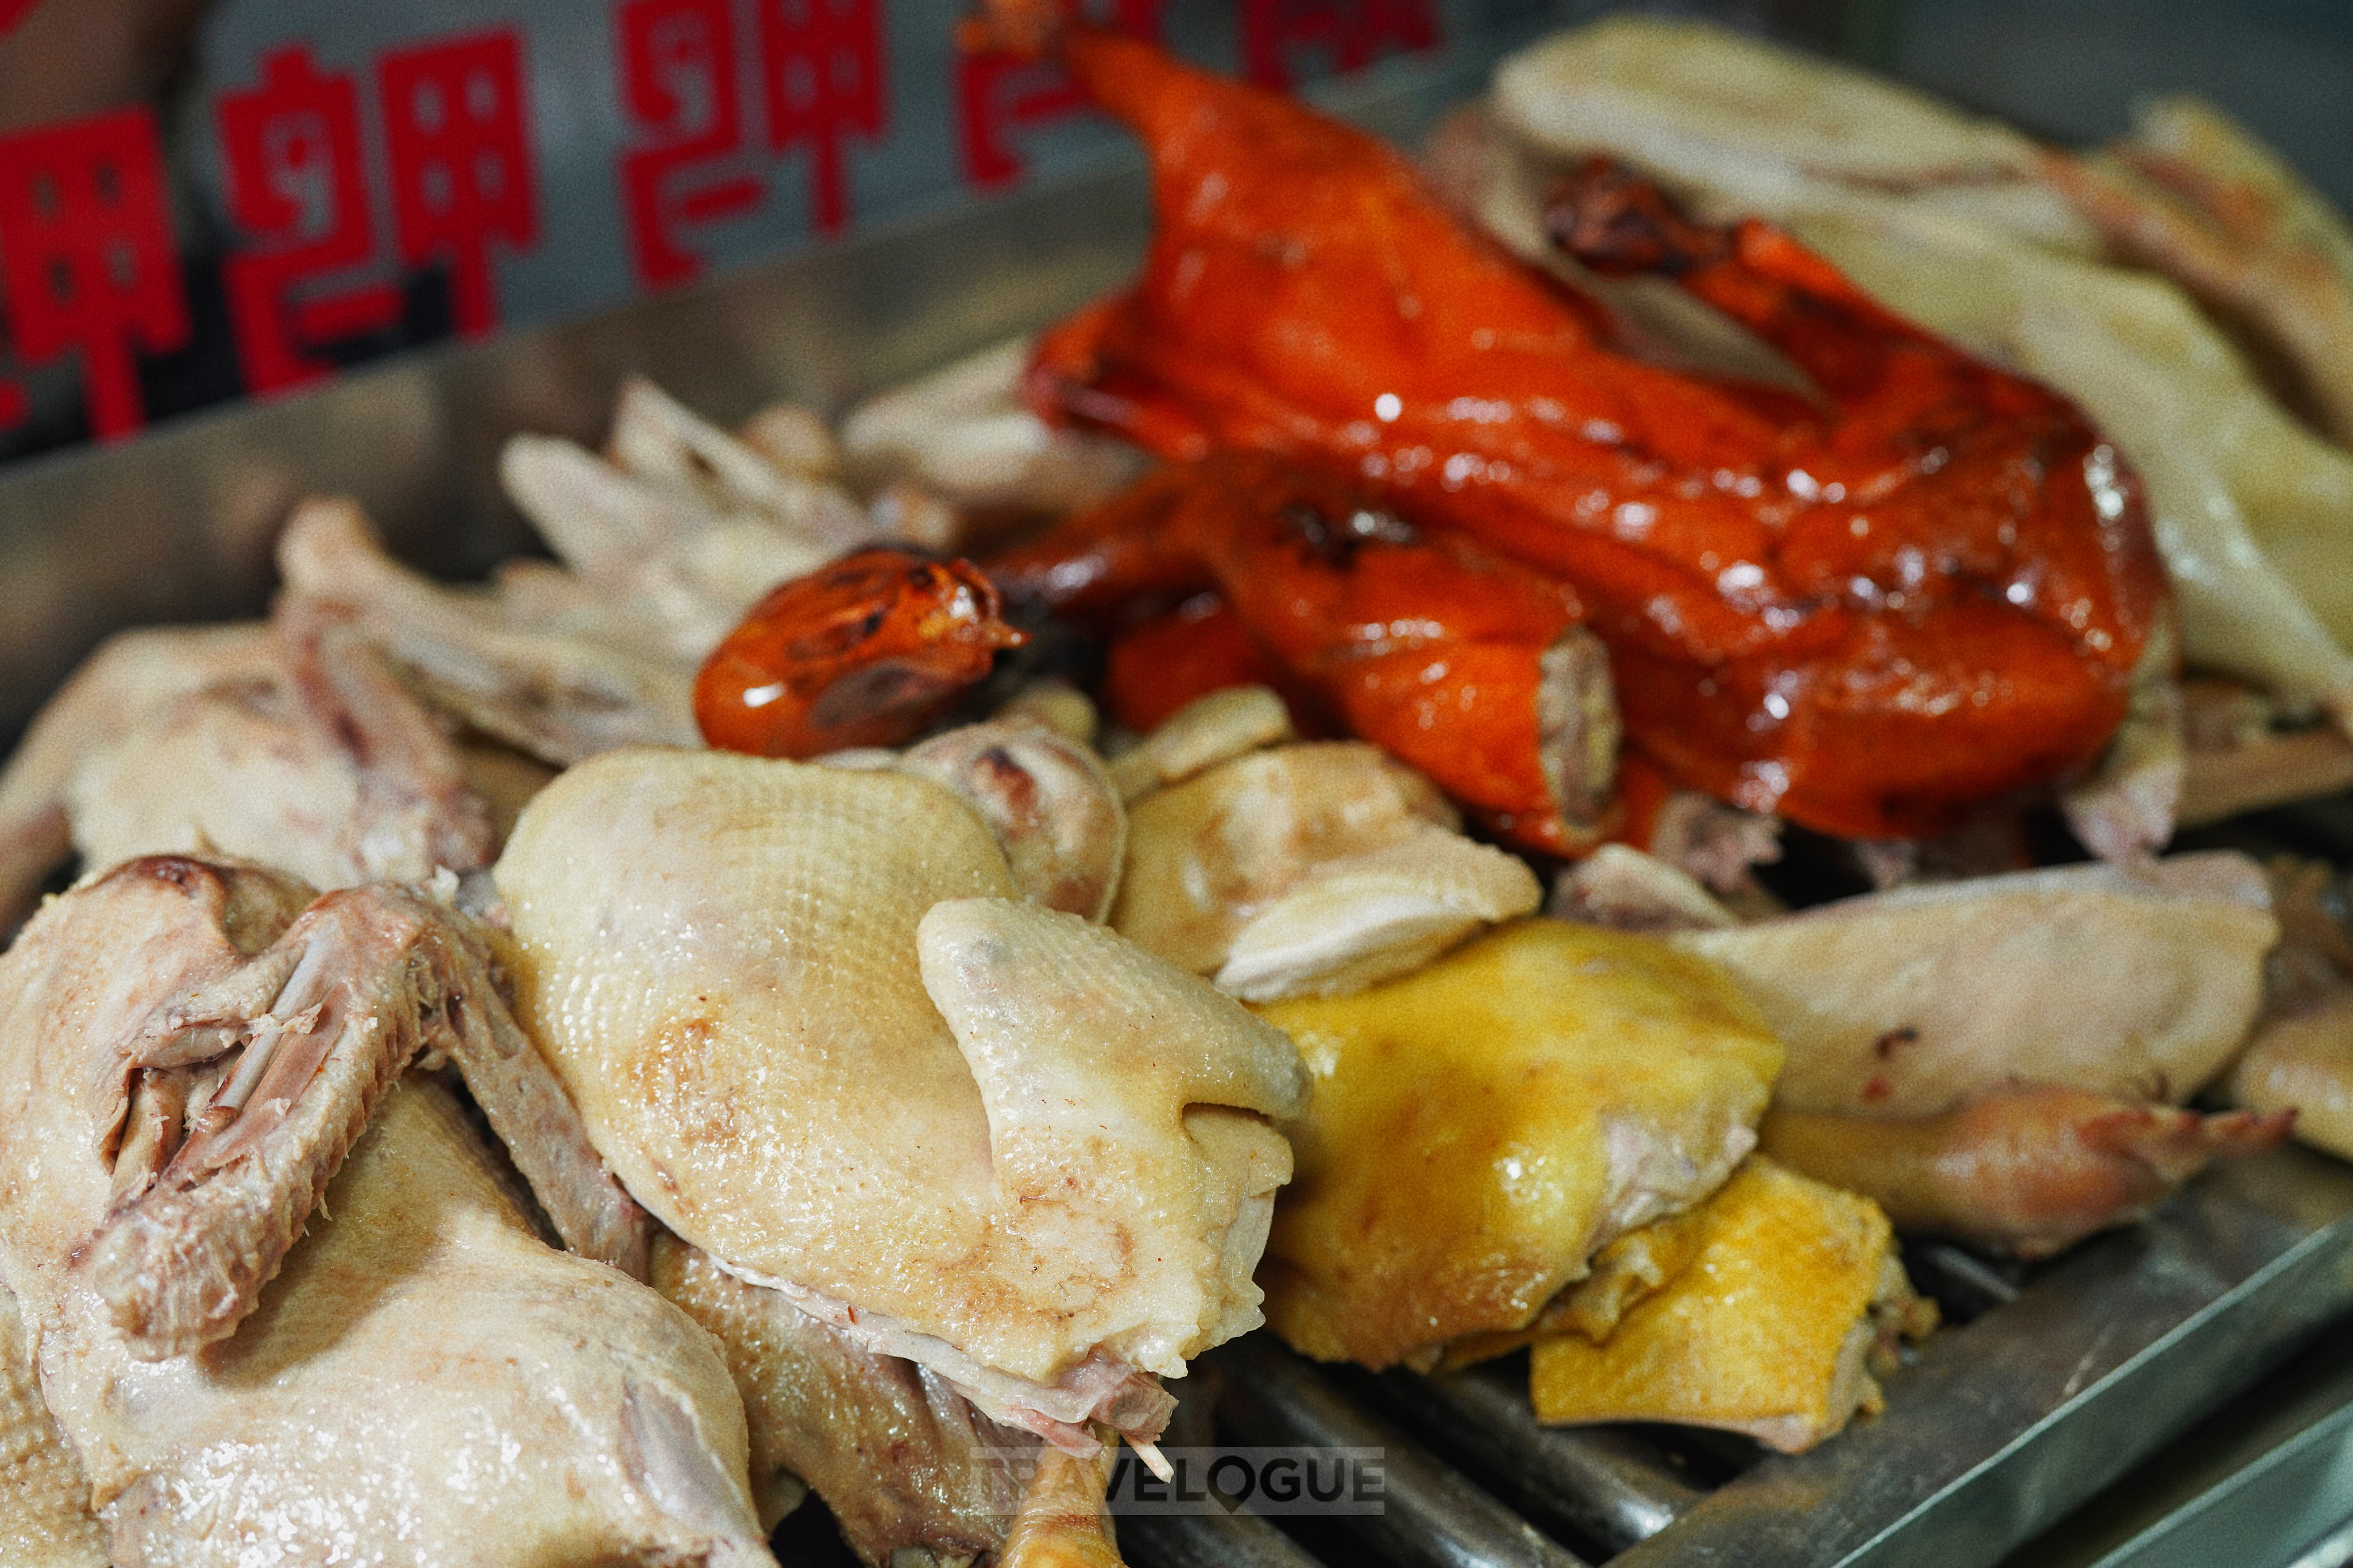 Jiaji Duck is made using an improved breed of duck introduced from overseas and cultivated in Hainan, where this dish ranks among the local favorites. Fortunately, cooking it isn't that difficult. The main goal is to draw out the duck's natural flavor. /CGTN